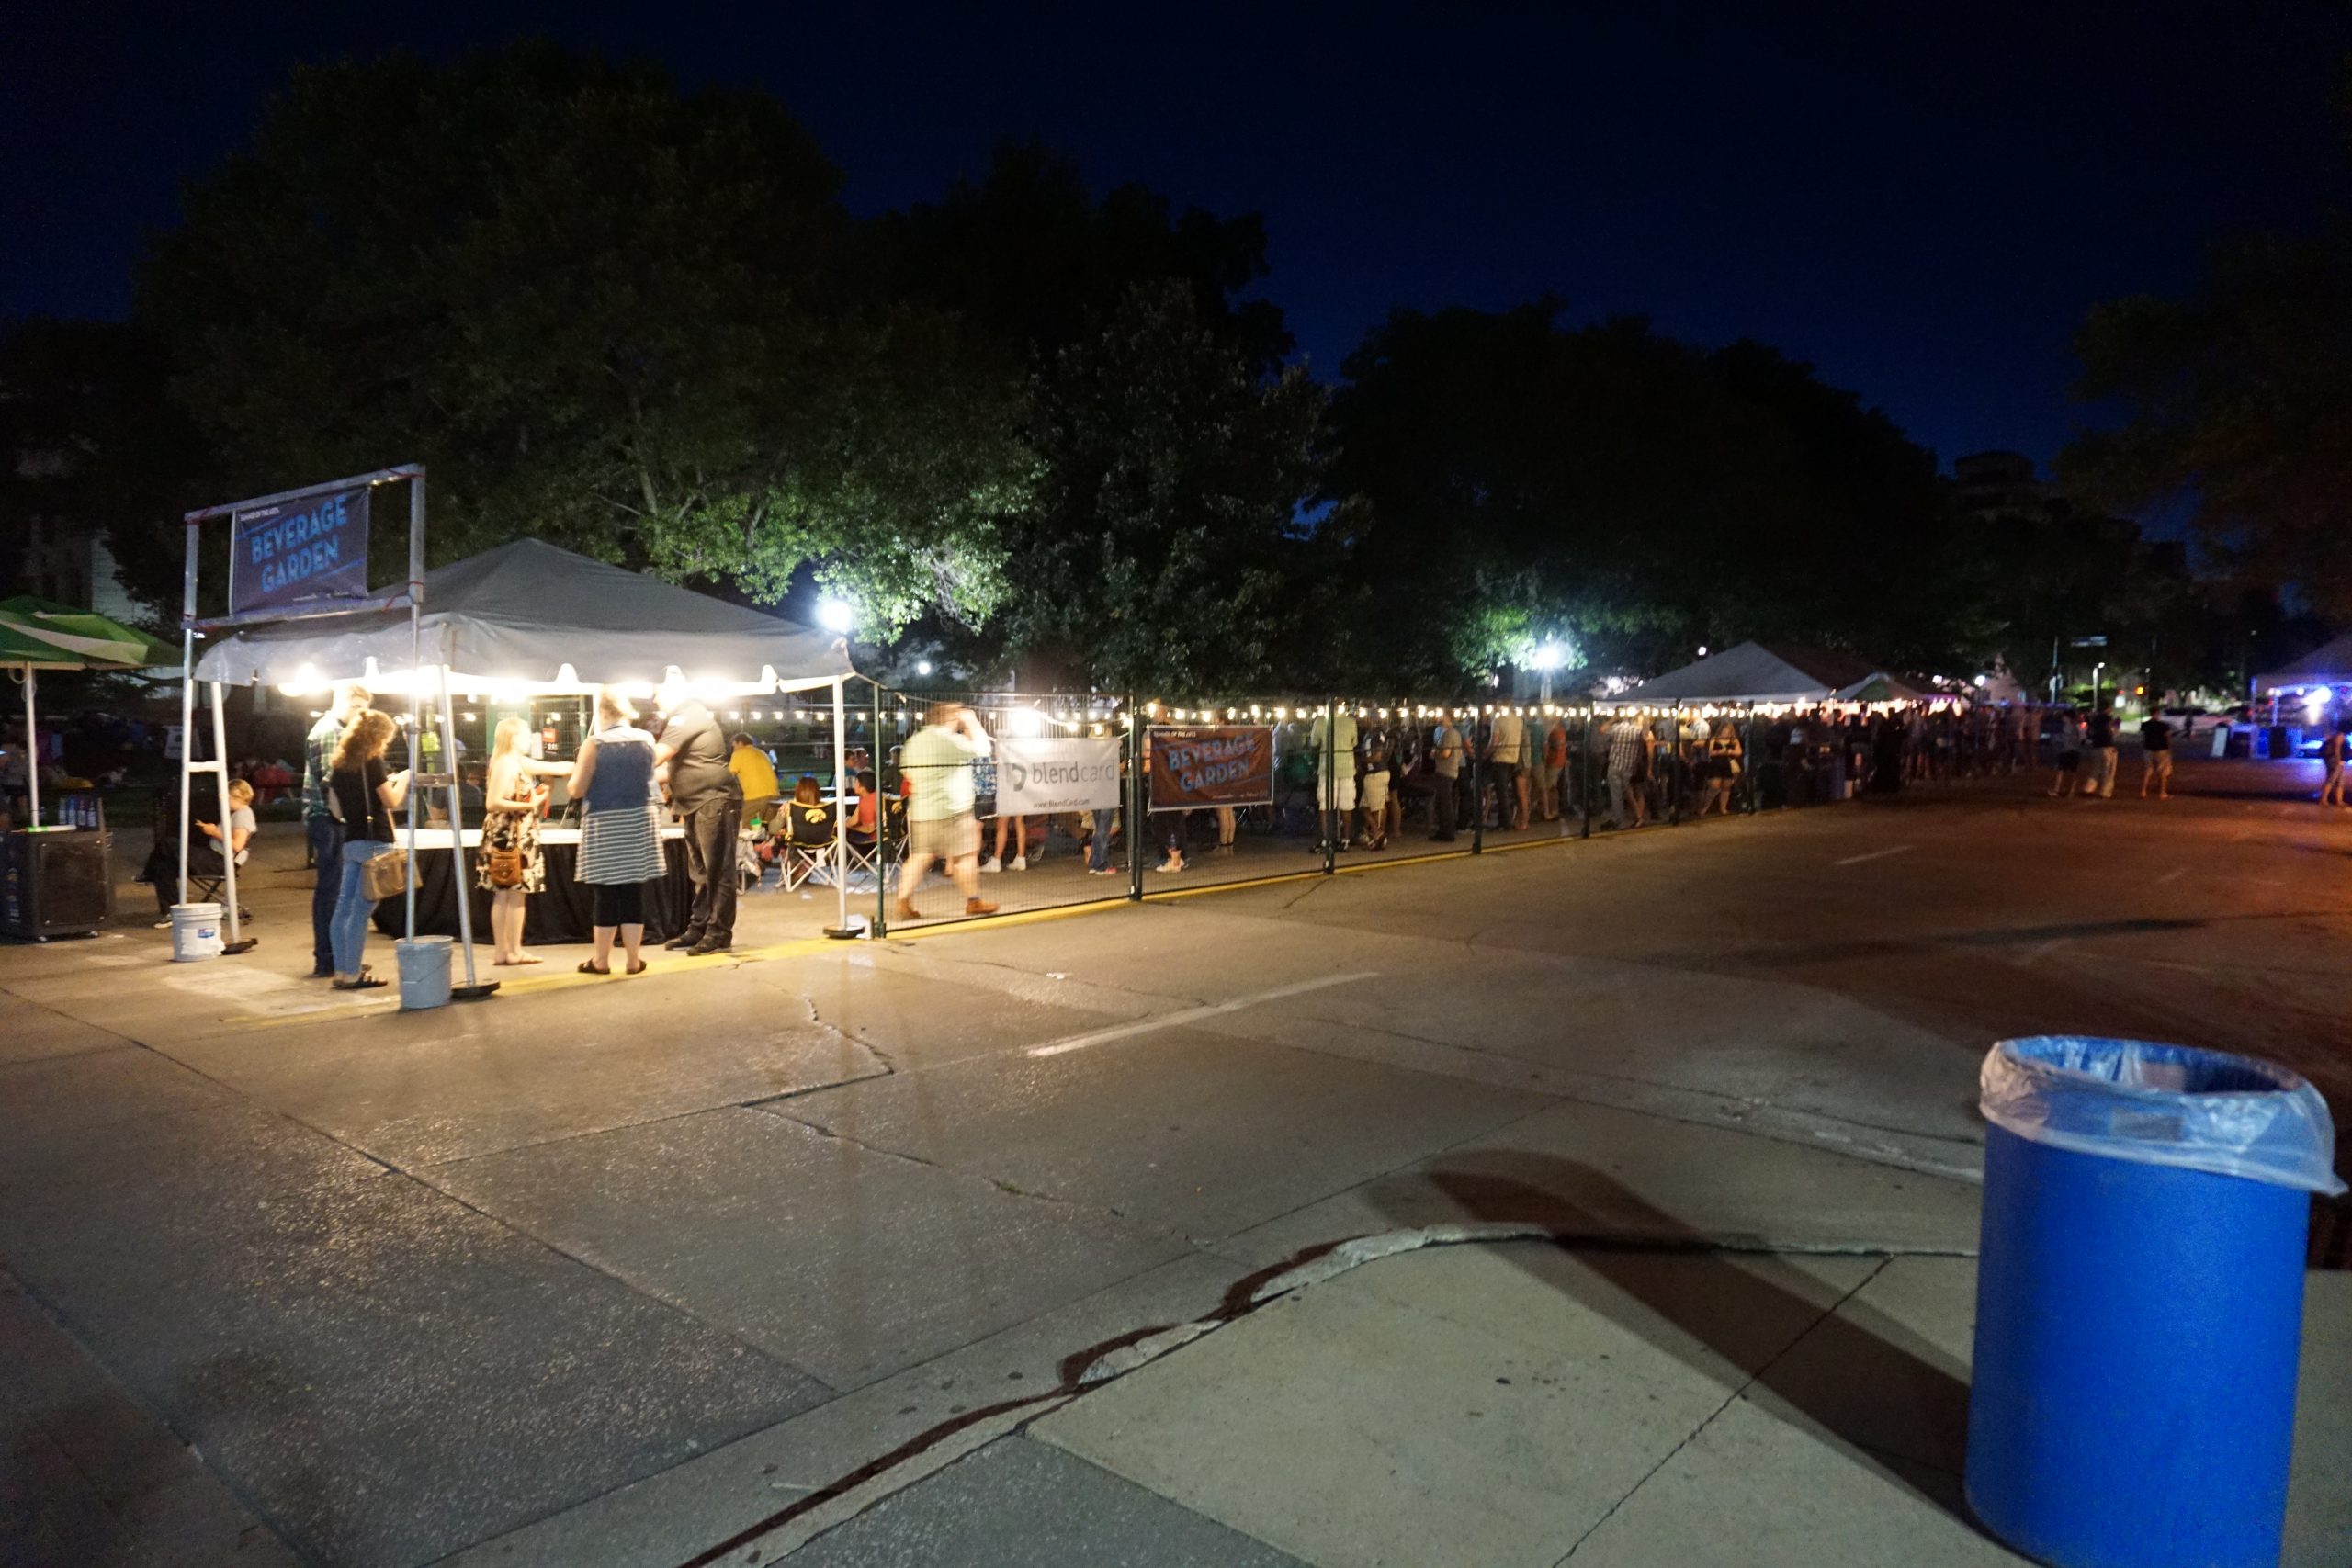 People packed into the Beverage Garden at the Festival Setup for the 2017 Iowa City Jazz Festival